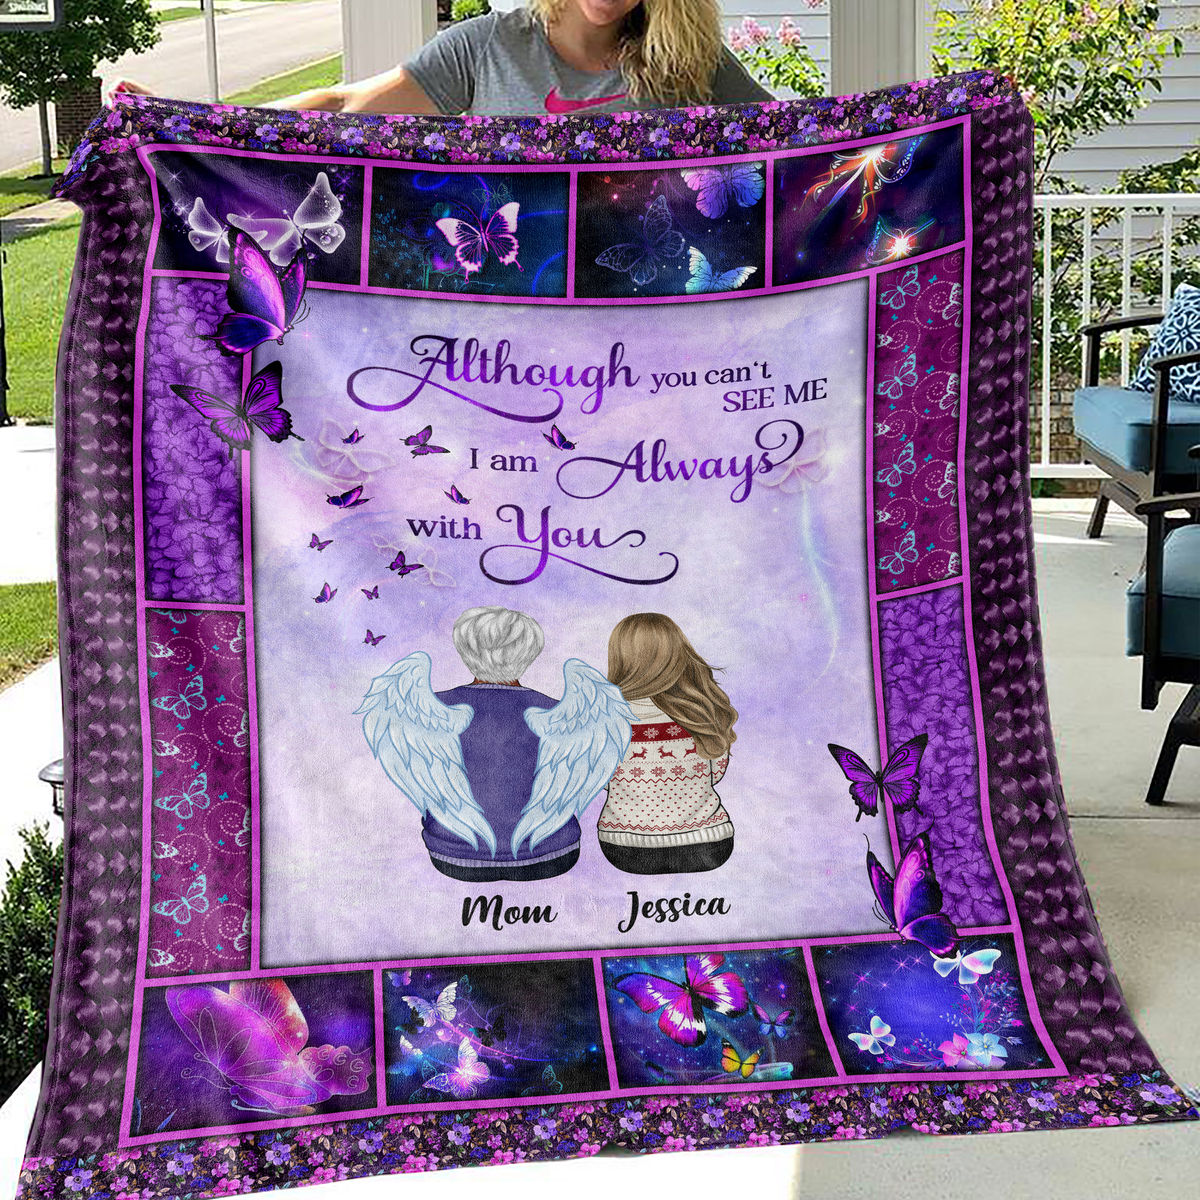 Personalized Blanket - Family - Although you can't see me. I am always with you - Blanket